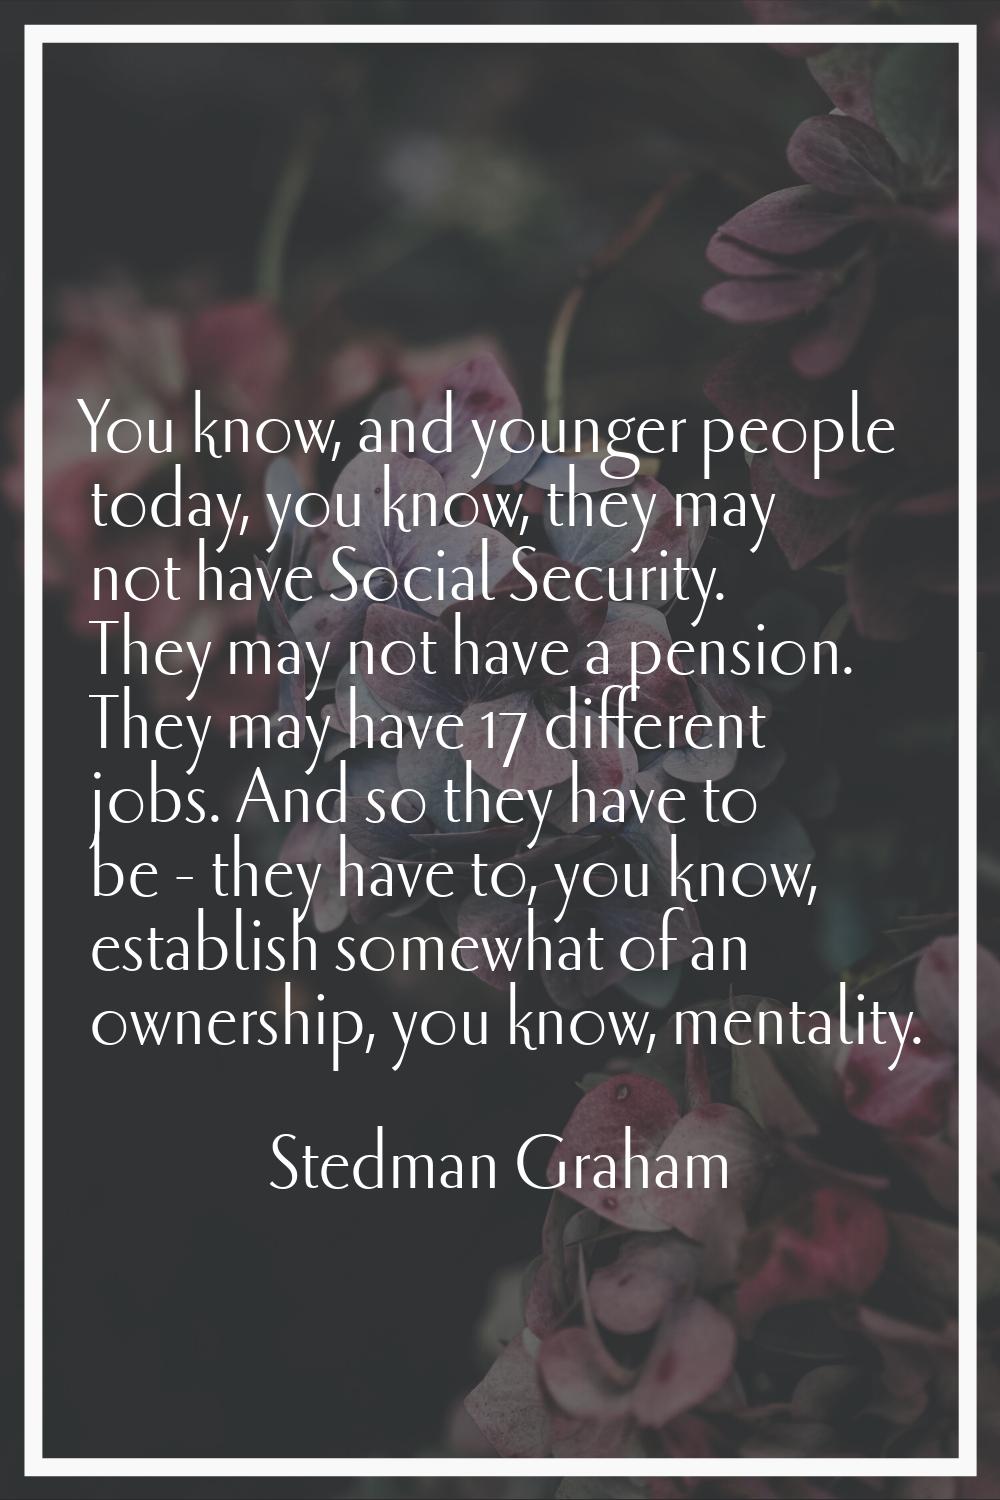 You know, and younger people today, you know, they may not have Social Security. They may not have 